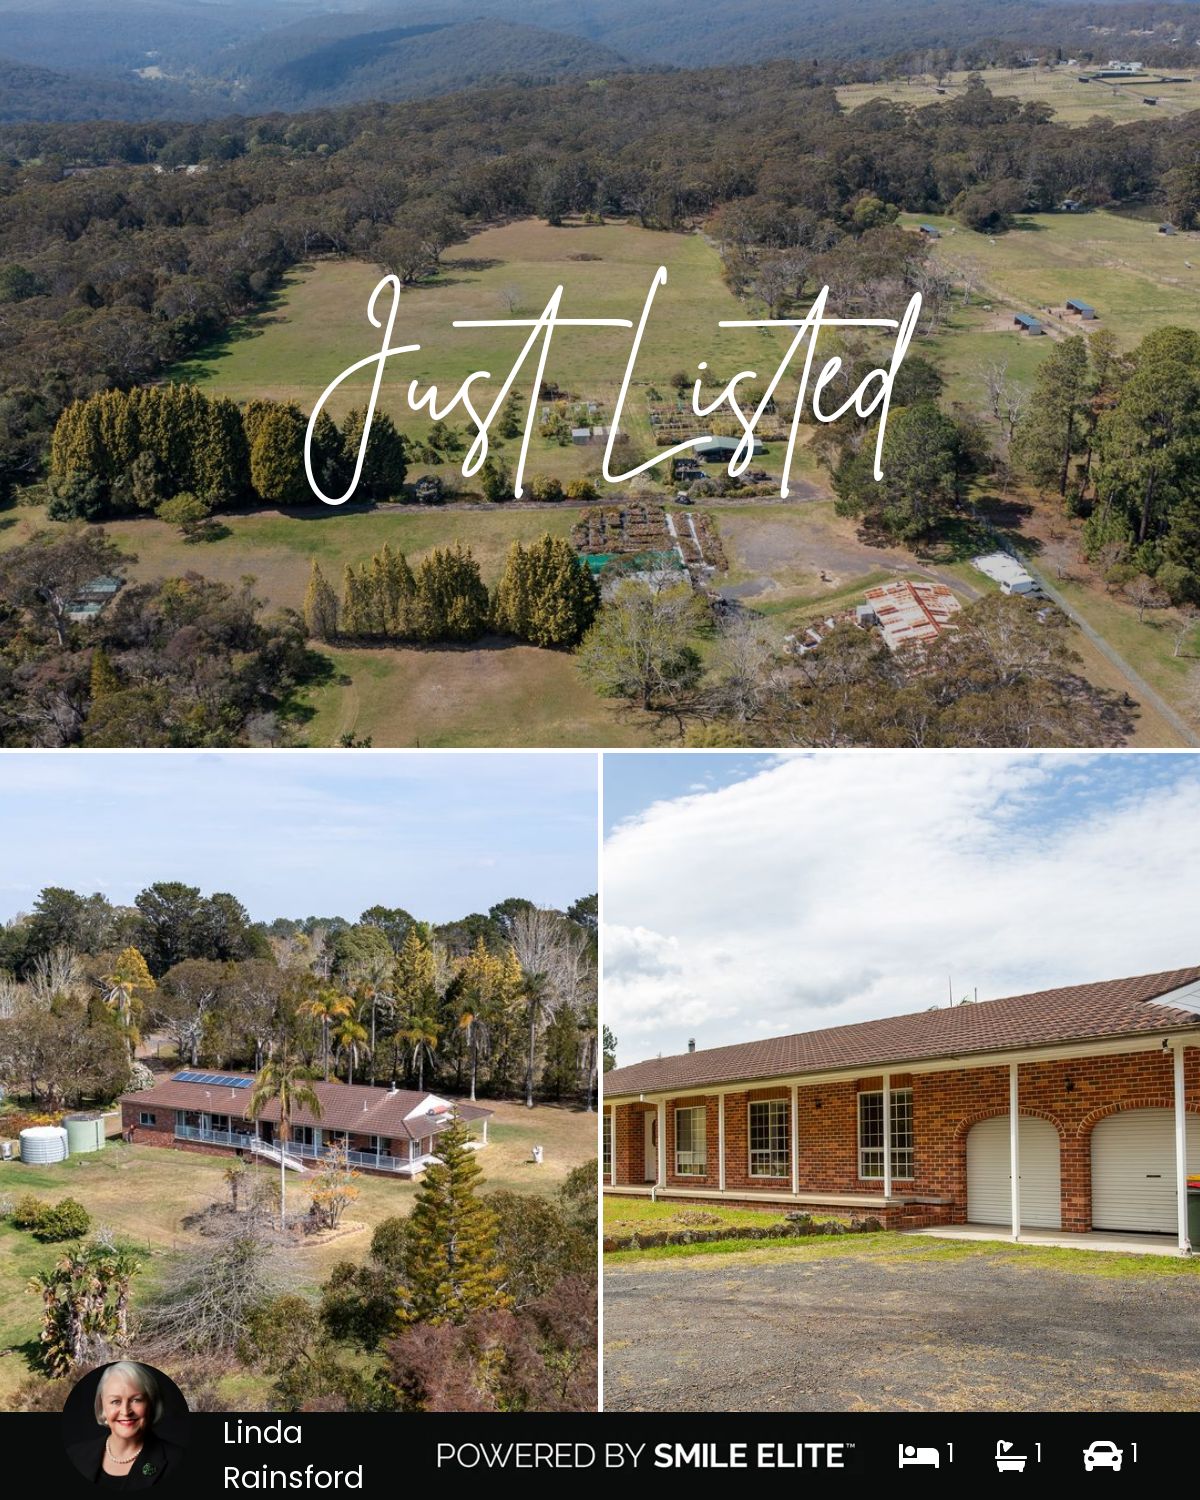 900 Wisemans Ferry Road, Somersby, NSW 2250 | Realty.com.au